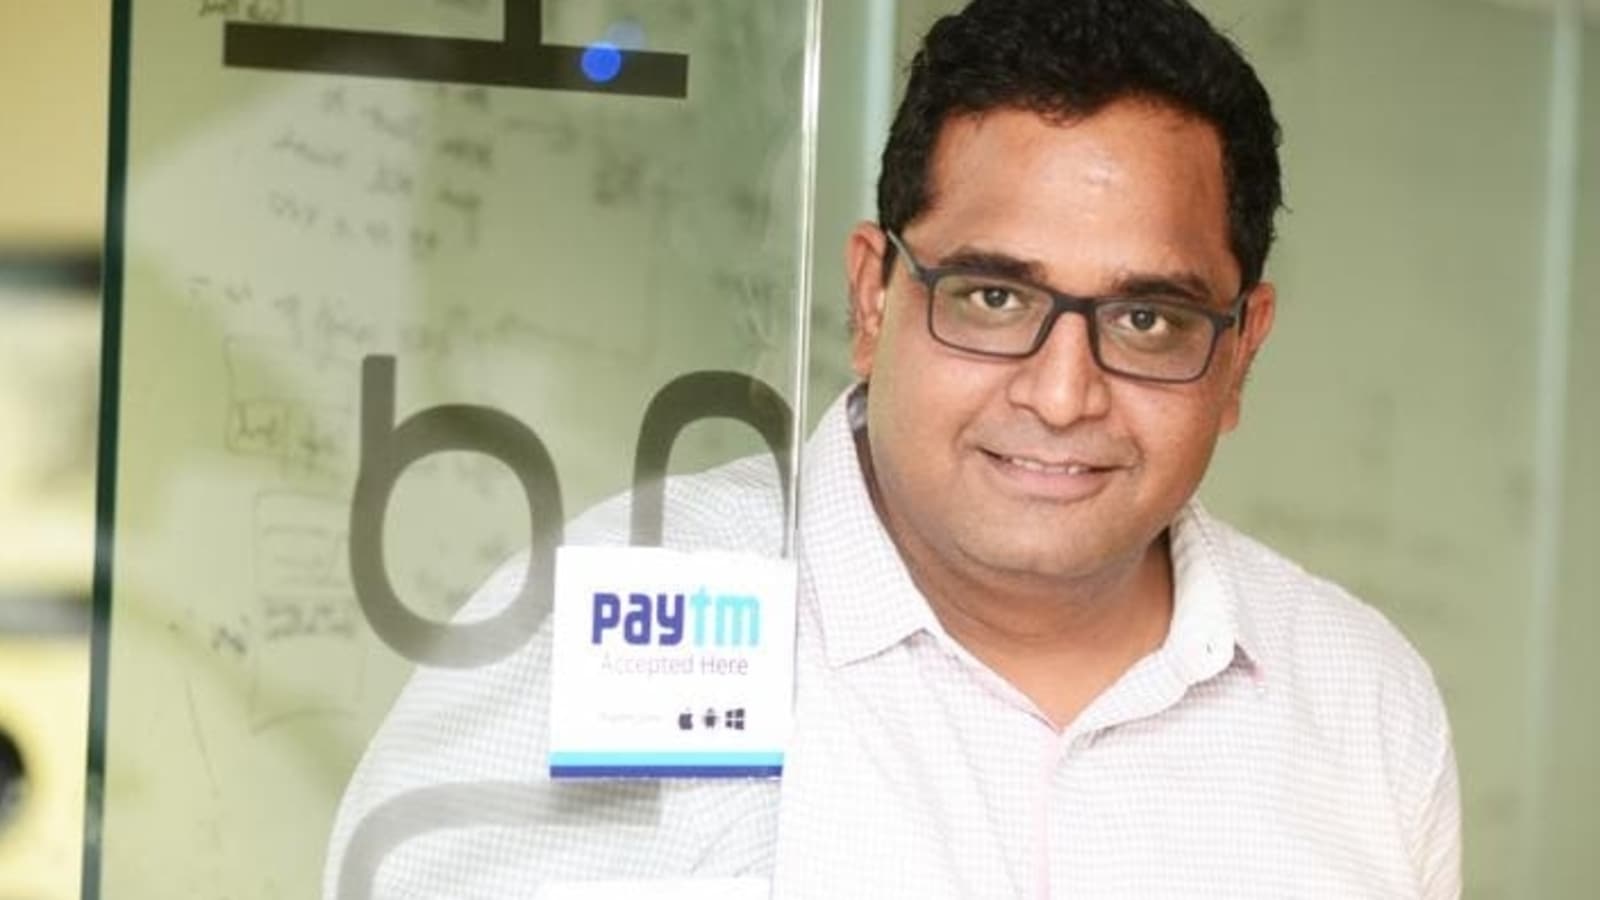 Advisory firm recommends against reappointment of Vijay Sharma as Paytm CEO - Hindustan Times